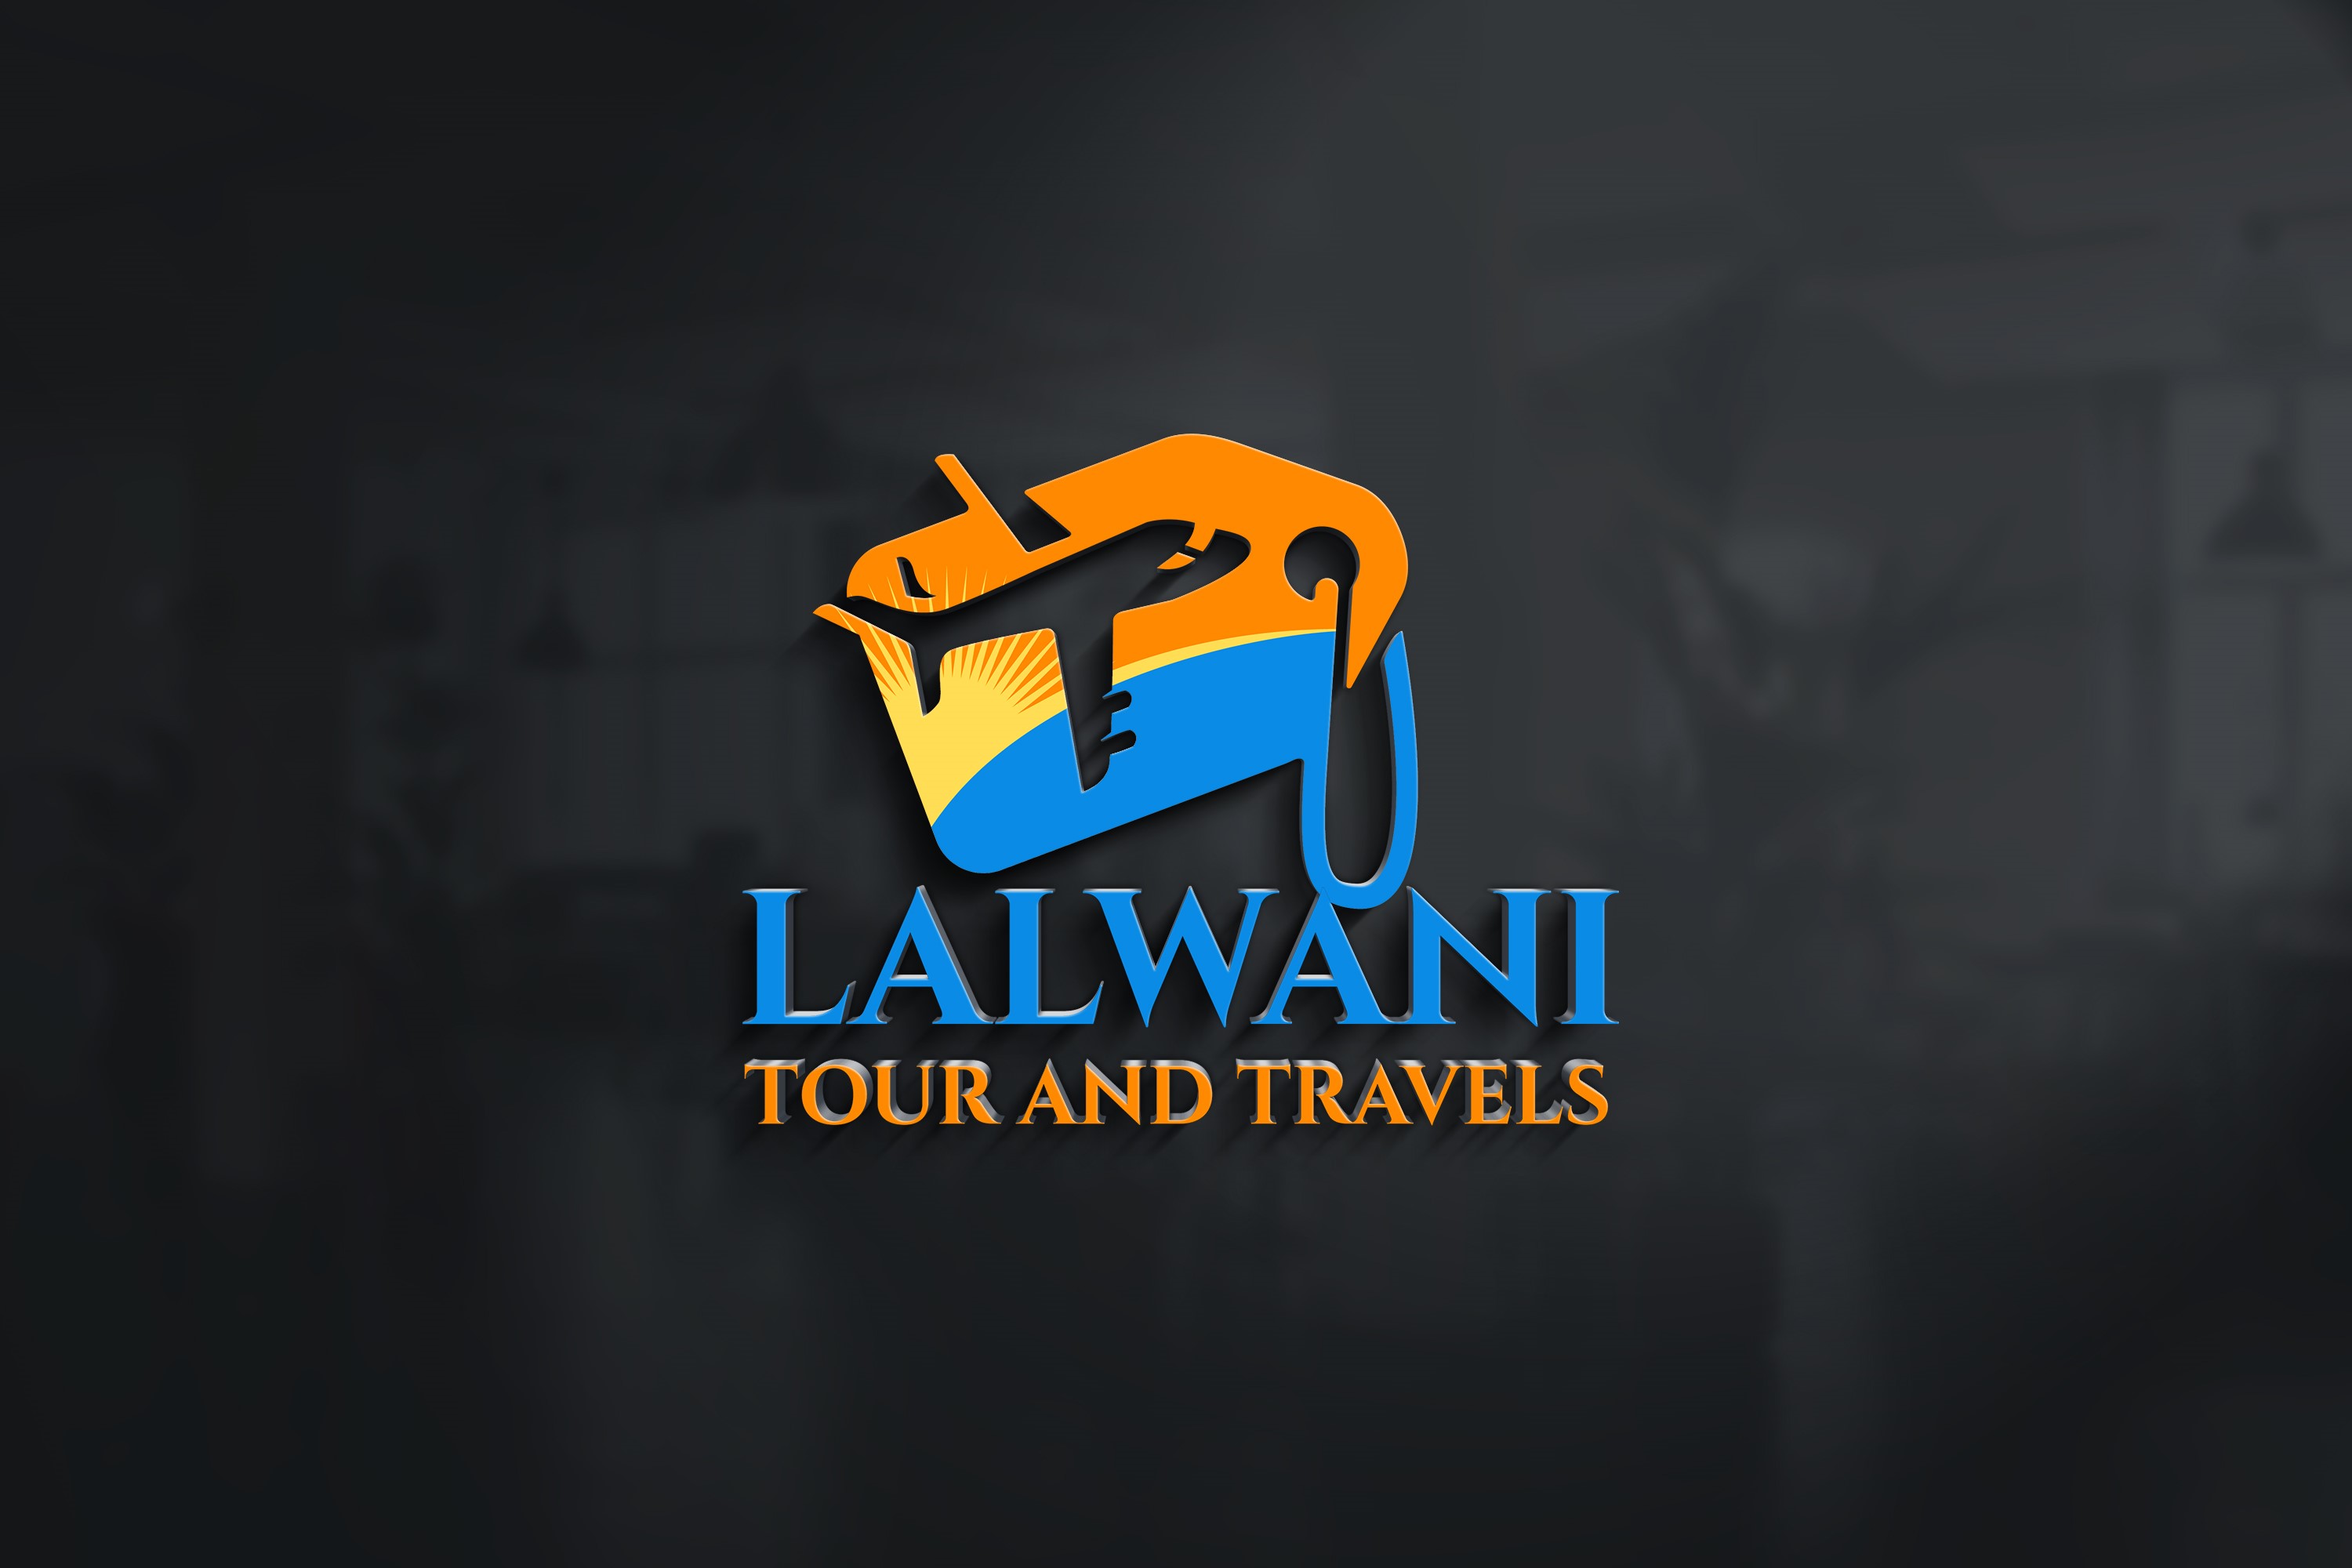 Lalwani Tour And Travels